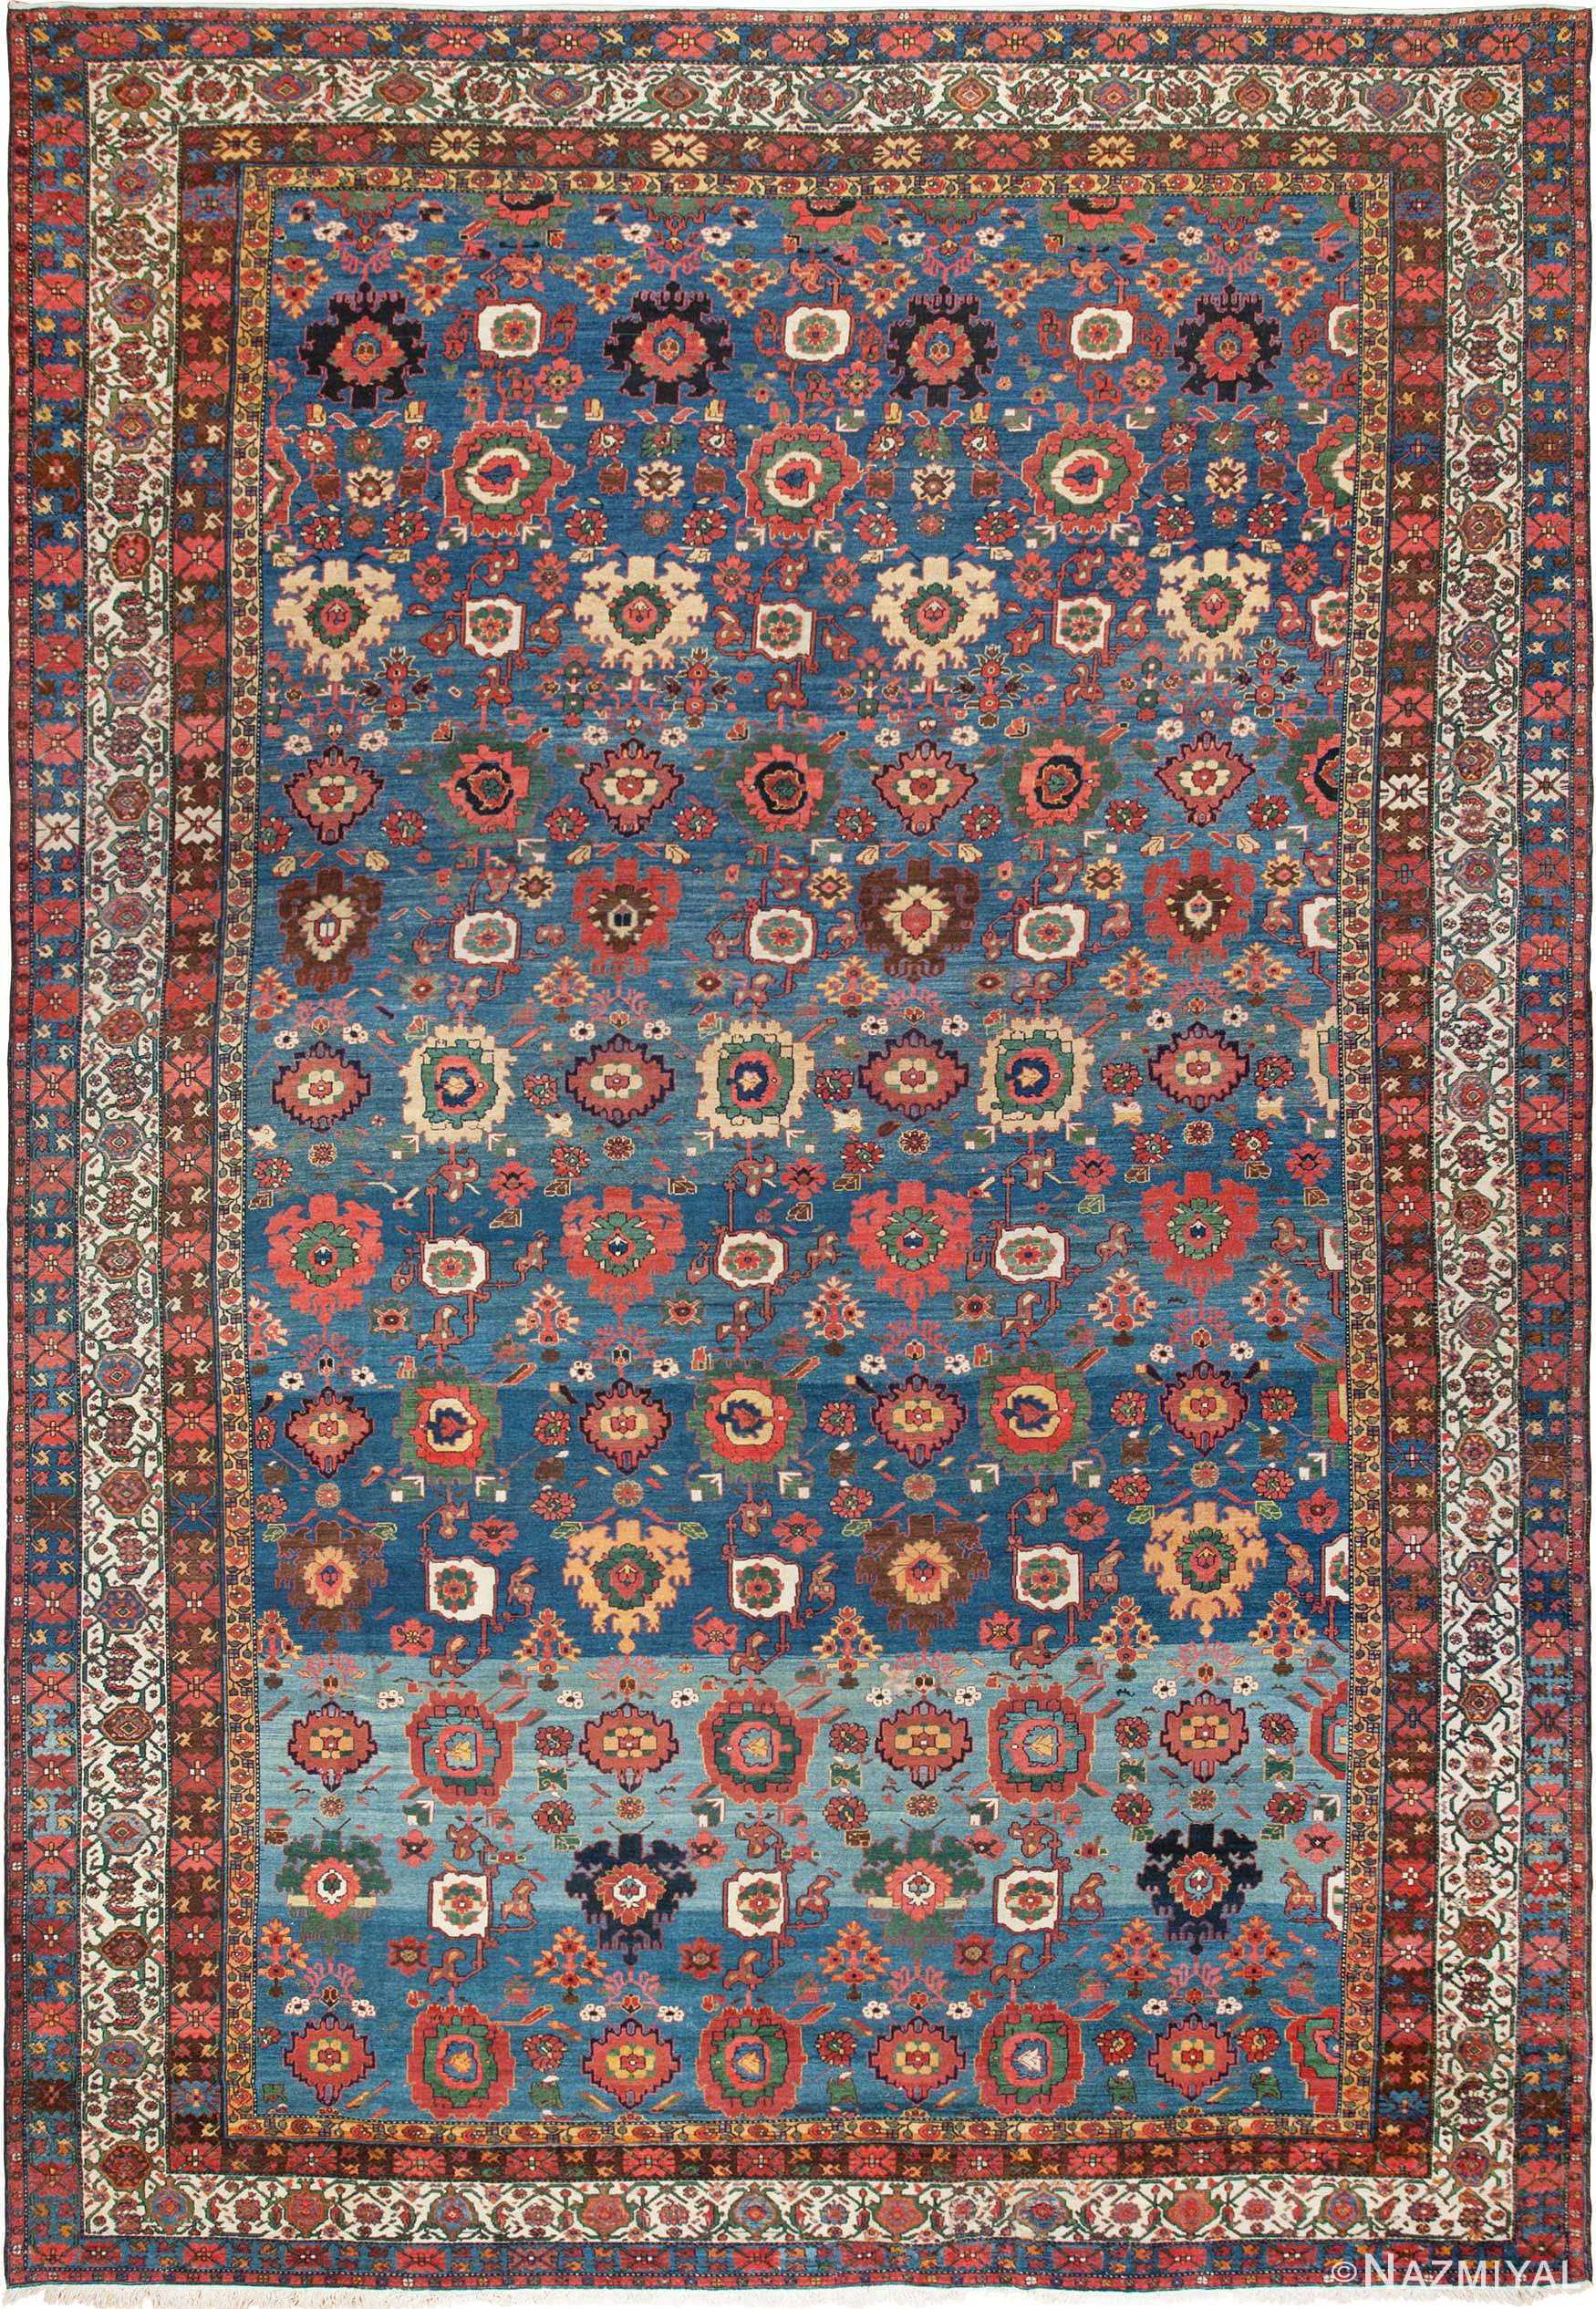 Oversized Blue Antique Persian Malayer Geometric Area Rug #45761 by Nazmiyal Antique Rugs